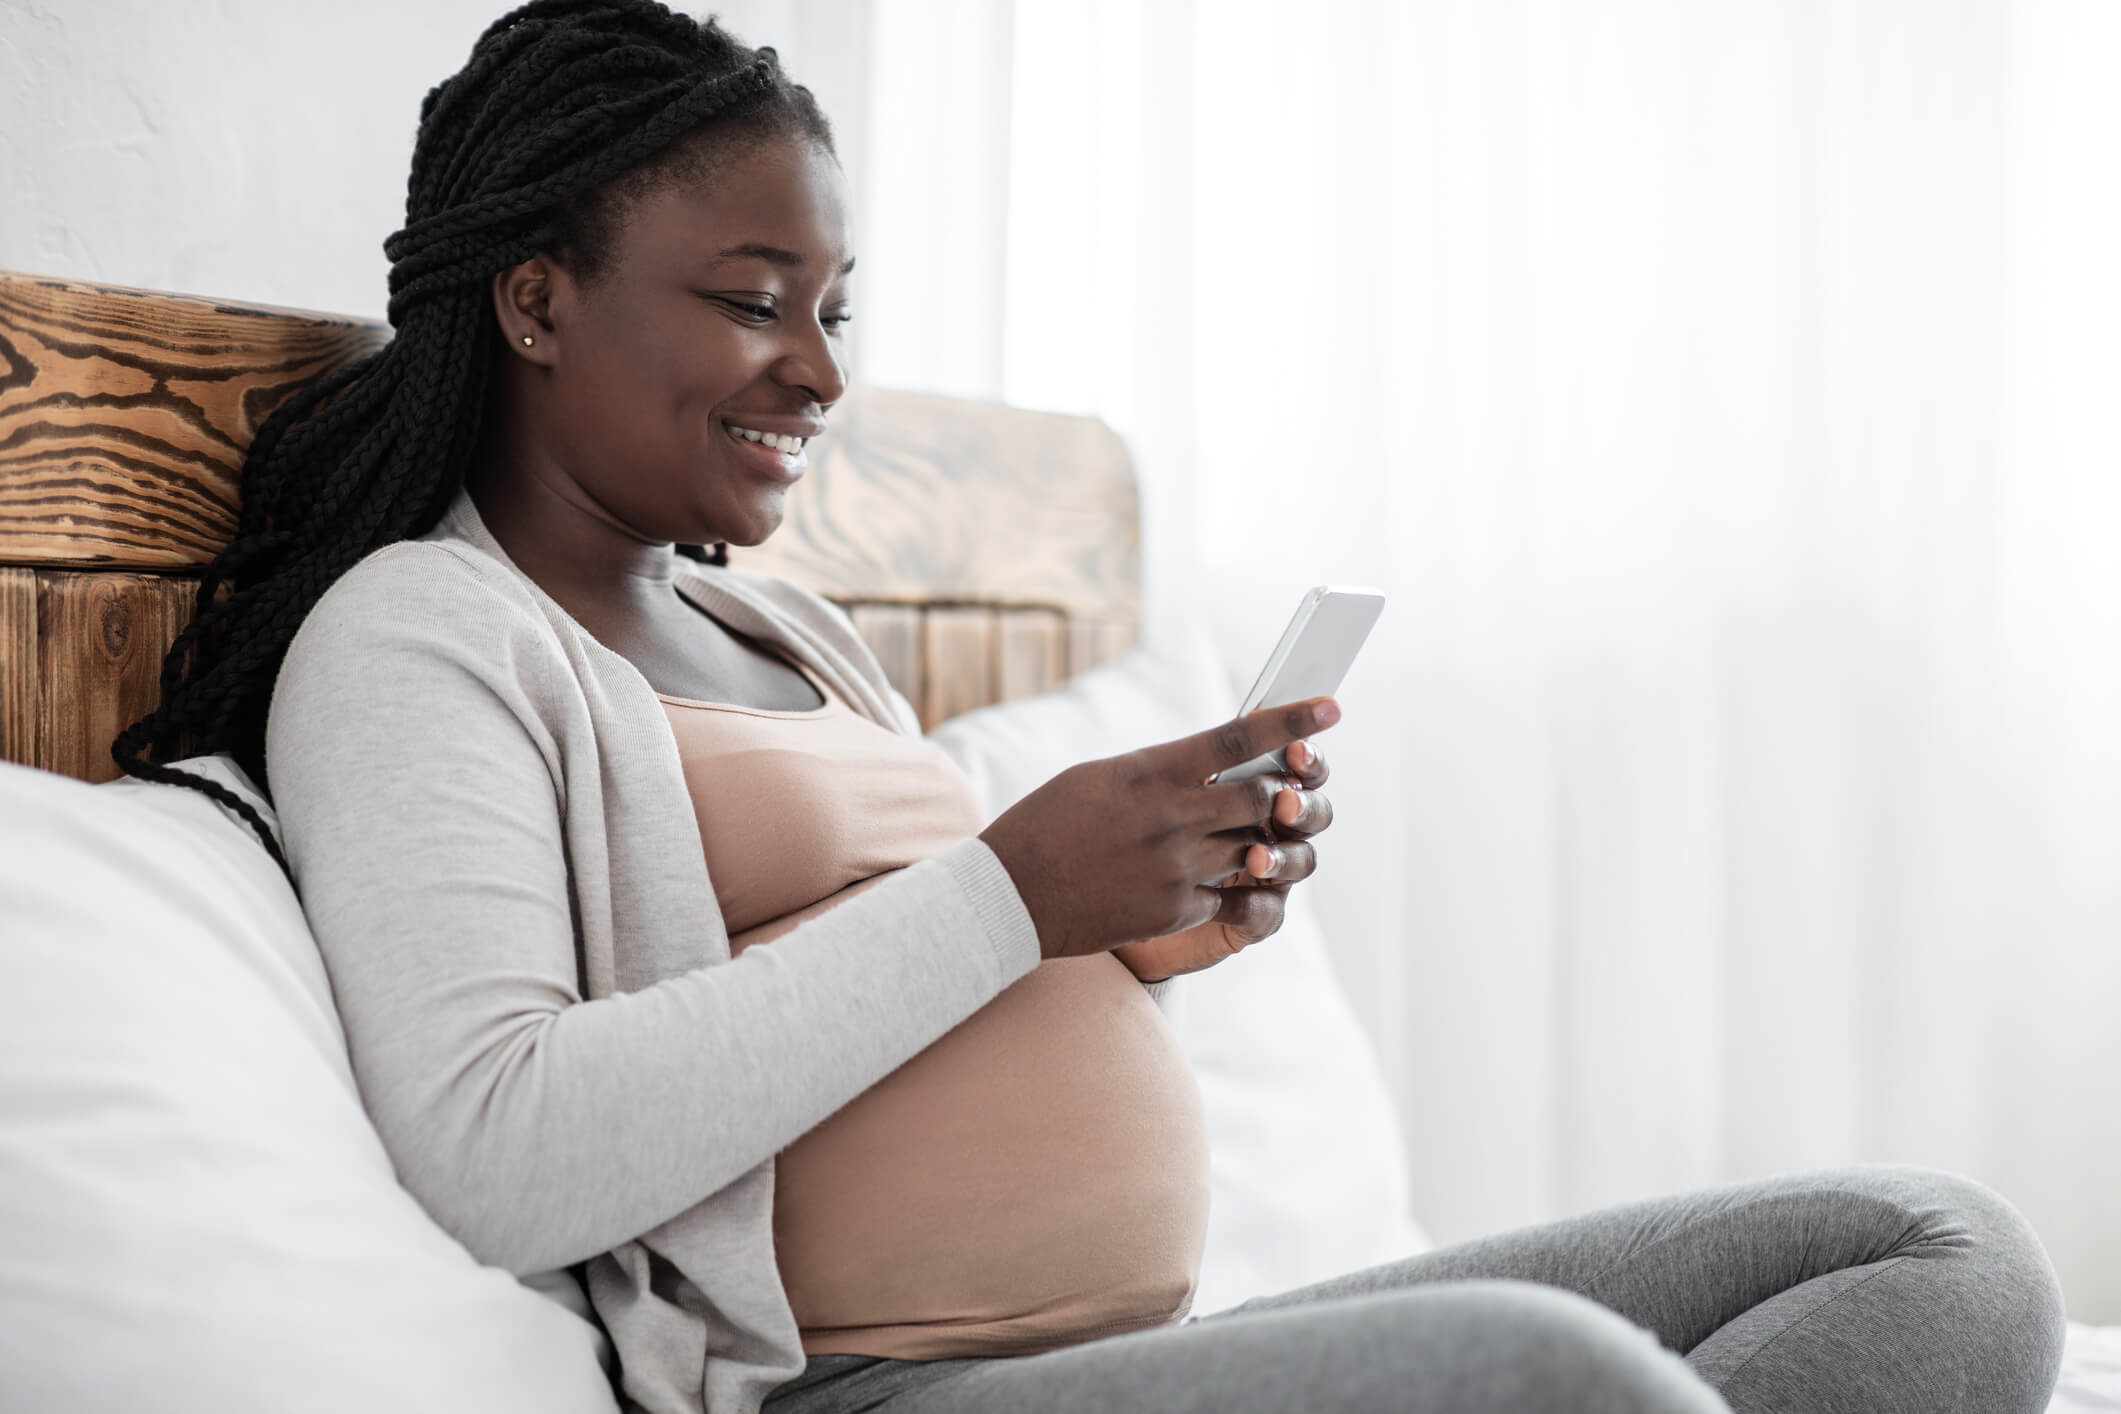 Joyful Black Pregnant Lady Spending Time With Smartphone At Home, Browsing Internet Or Messaging With Friends, African Expectant Woman Relaxing On Comfortable Bed, Side View Shot With Copy Space